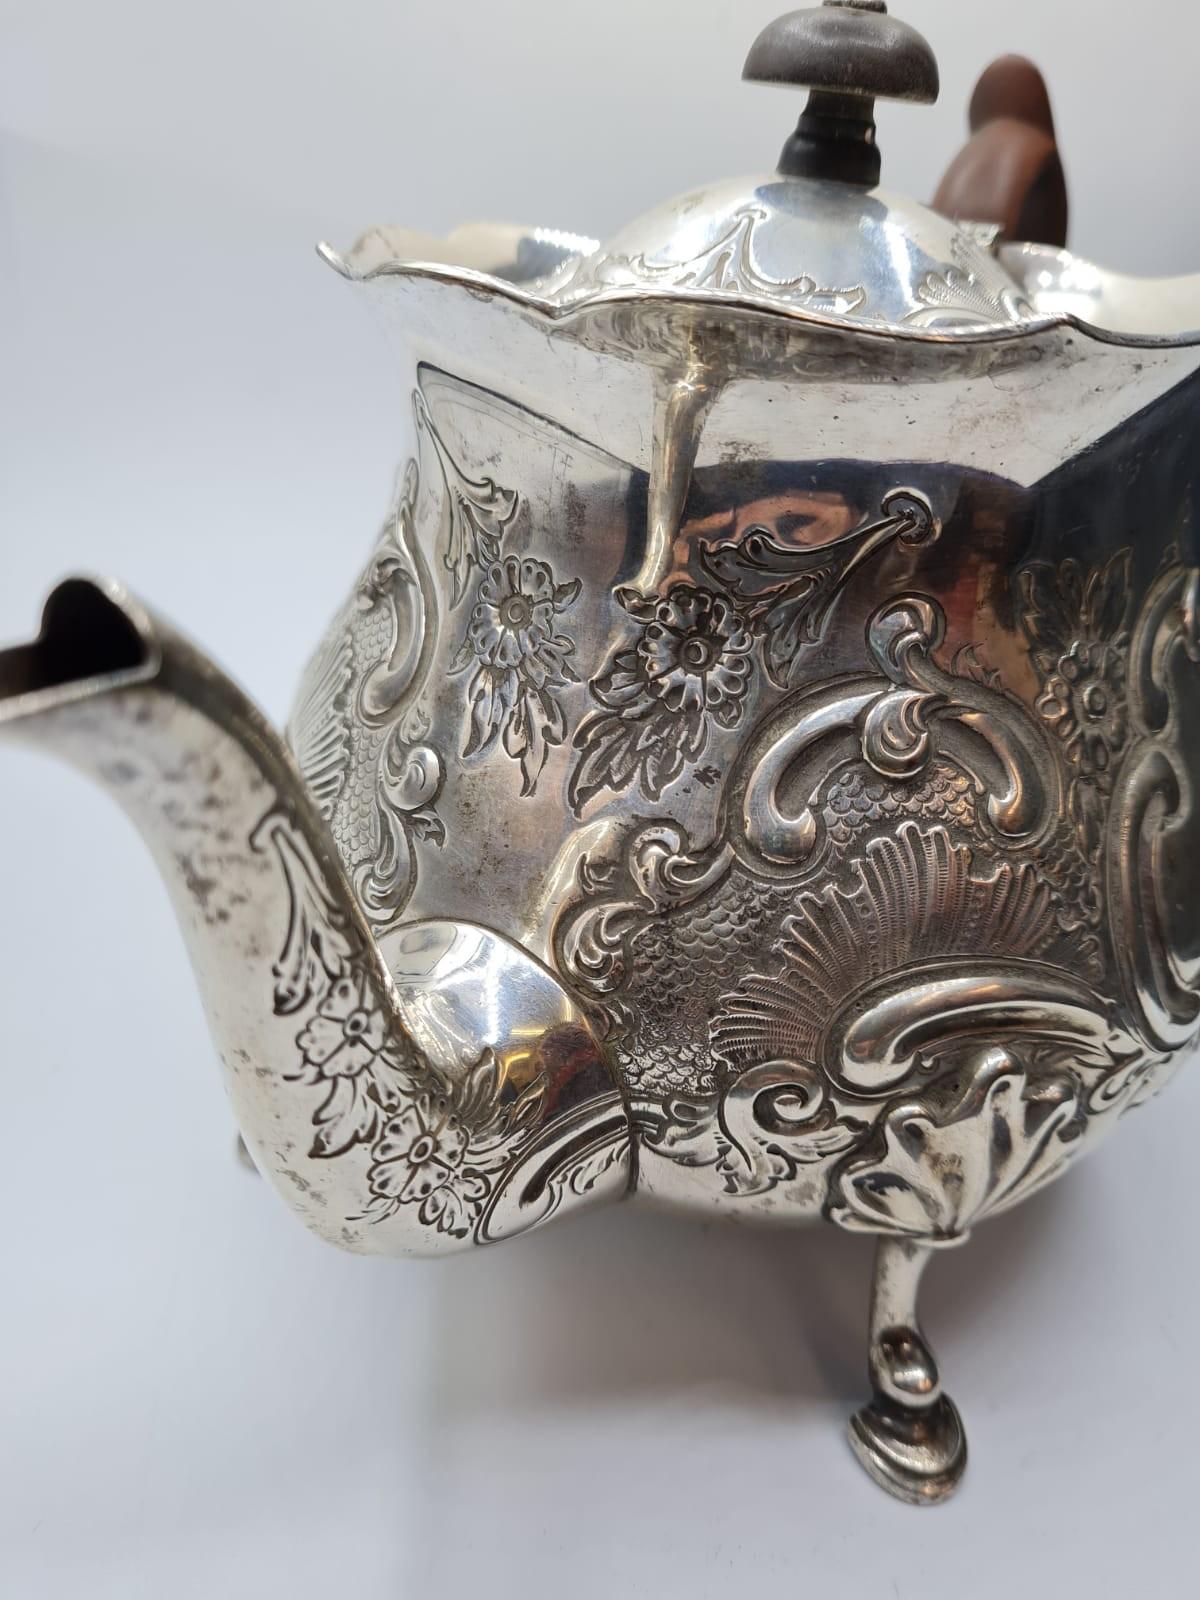 1920 Ornate Silver Teapot 766g - Image 4 of 8